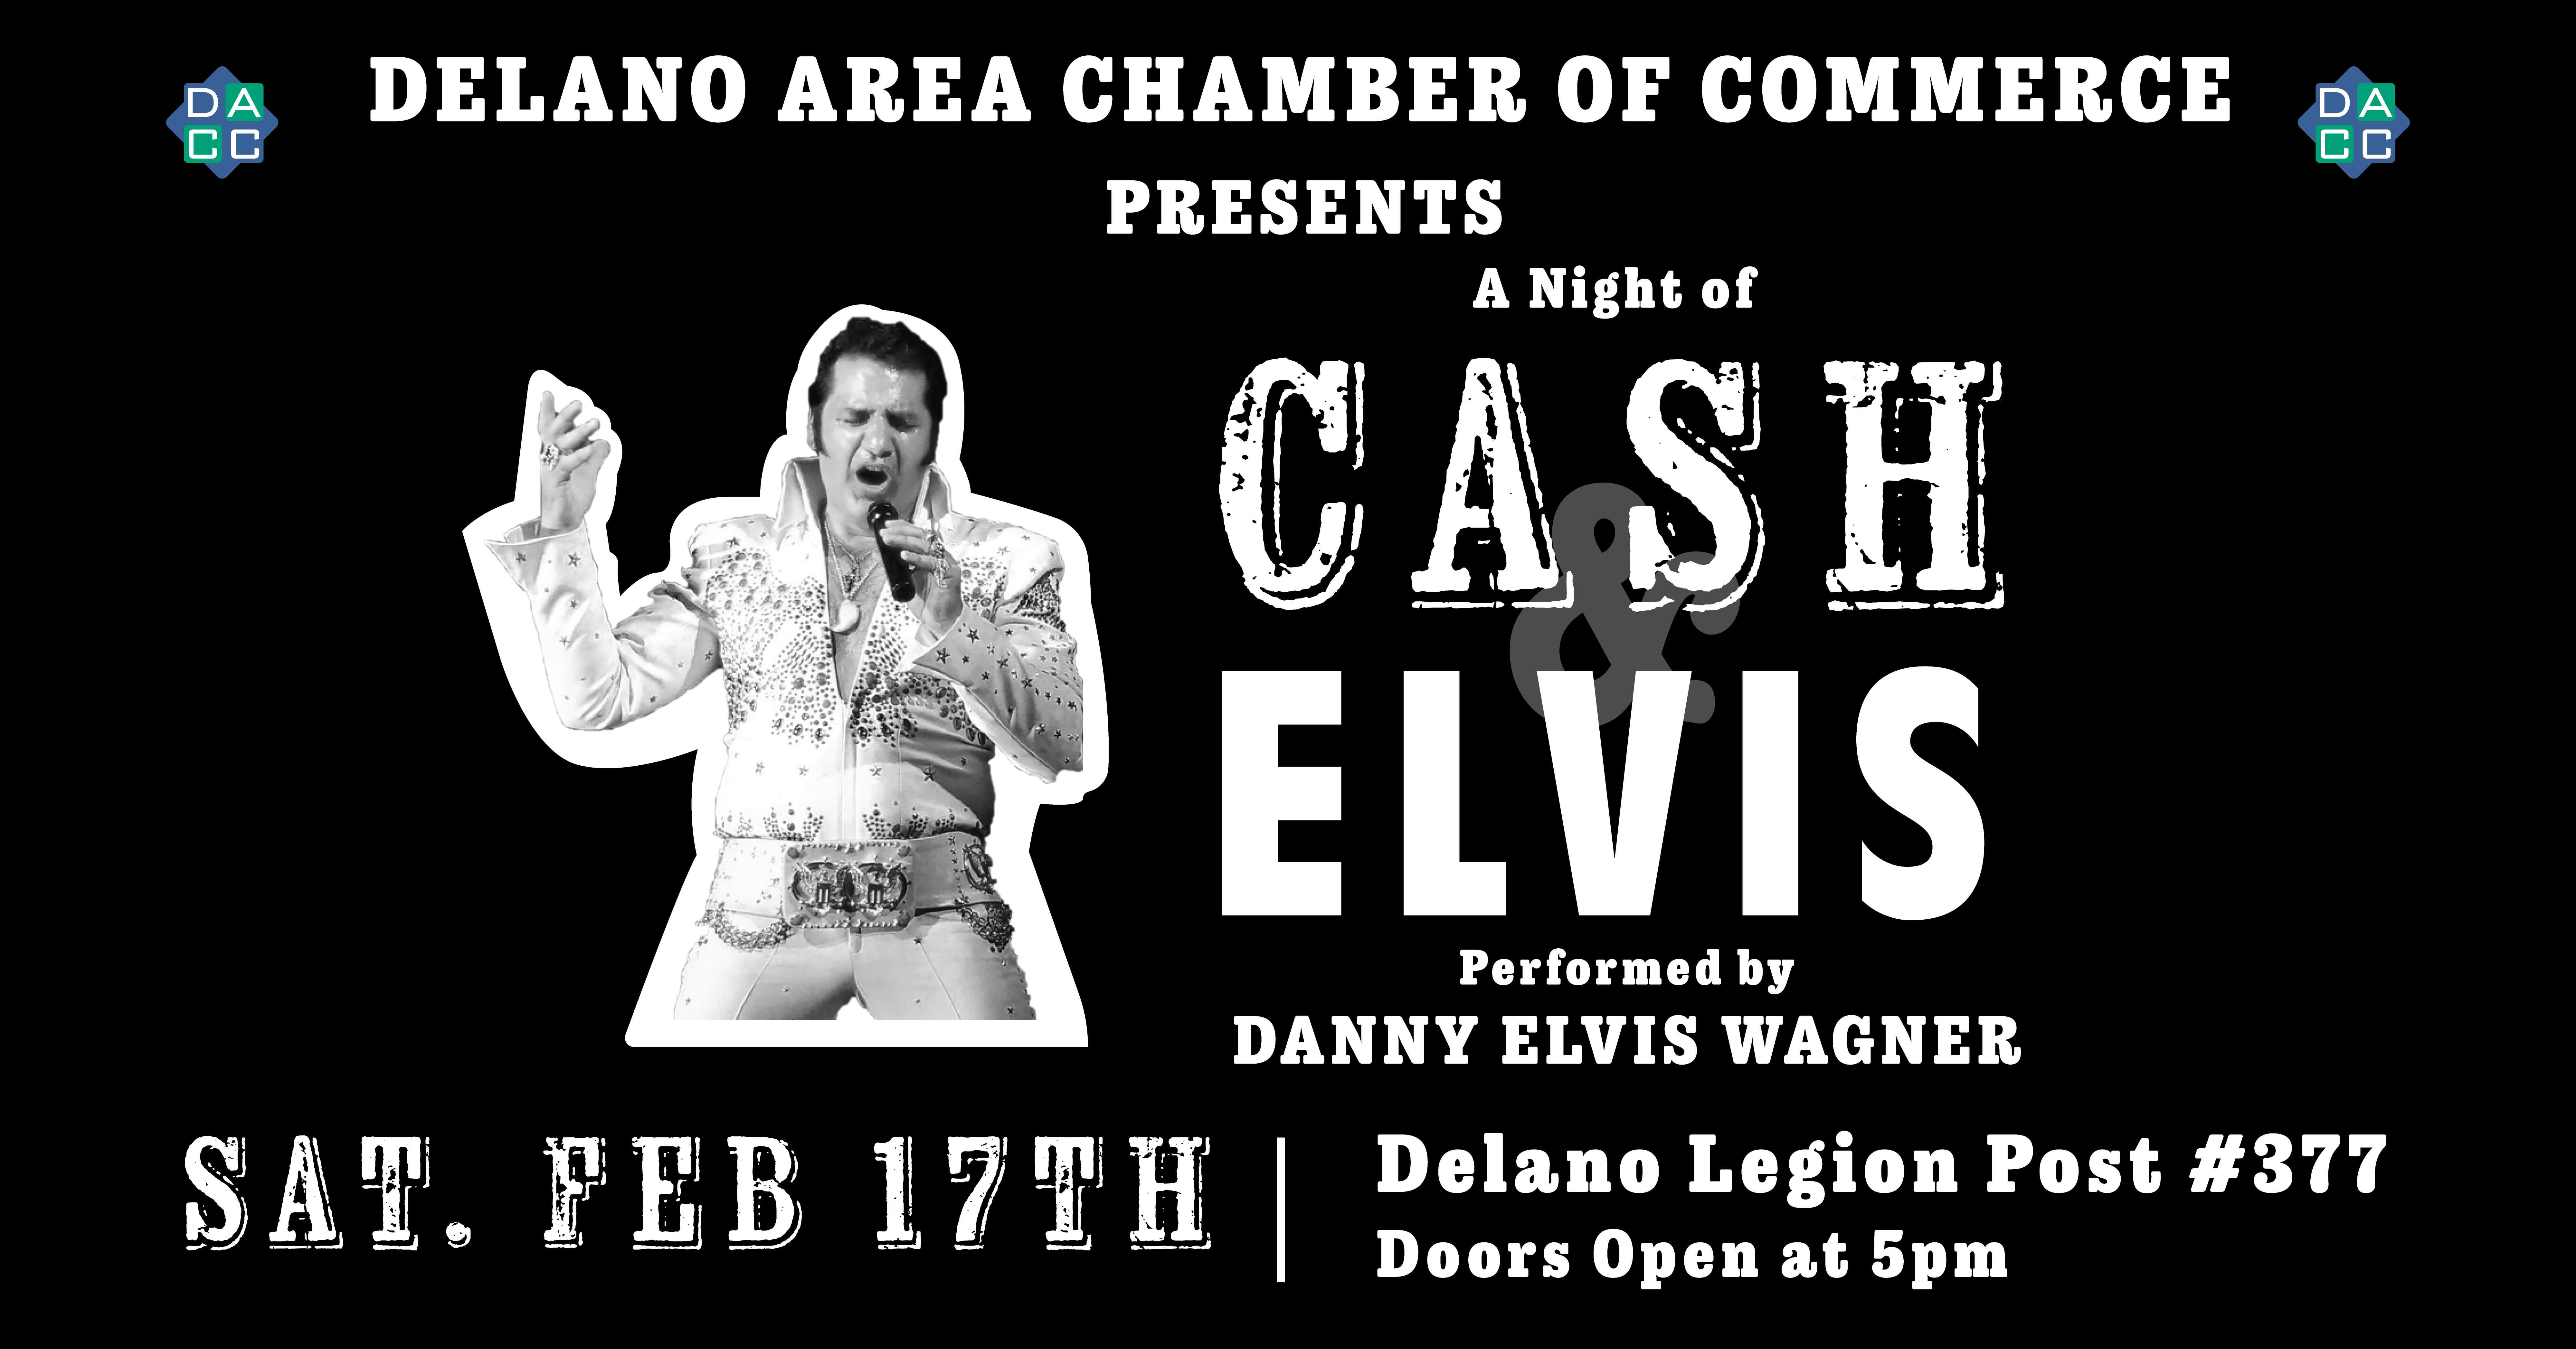 USE chamber night of cash and elvis fb banner-01 (003)